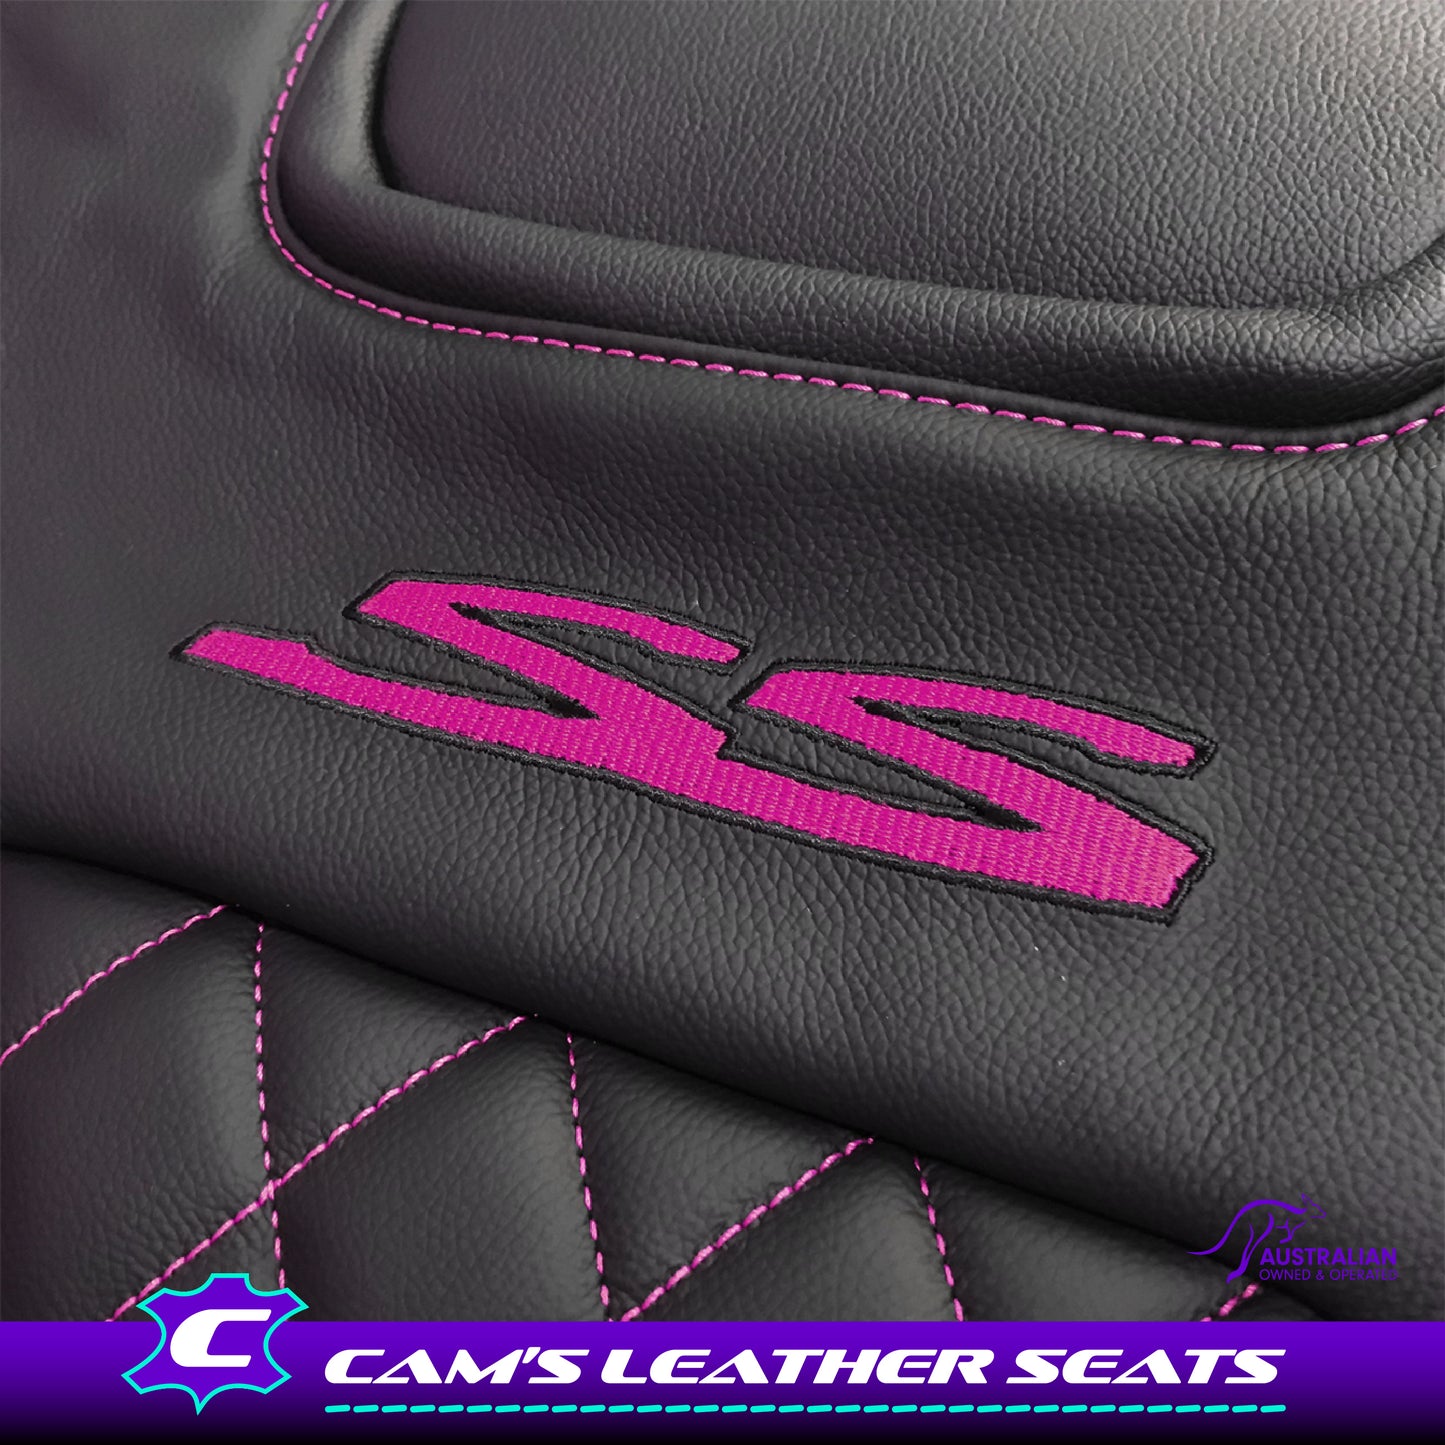 LEATHER SEATS TRIM KIT FOR HOLDEN VE SS UTE DIAMOND STITCH INSERTS CHOOSE COLOUR